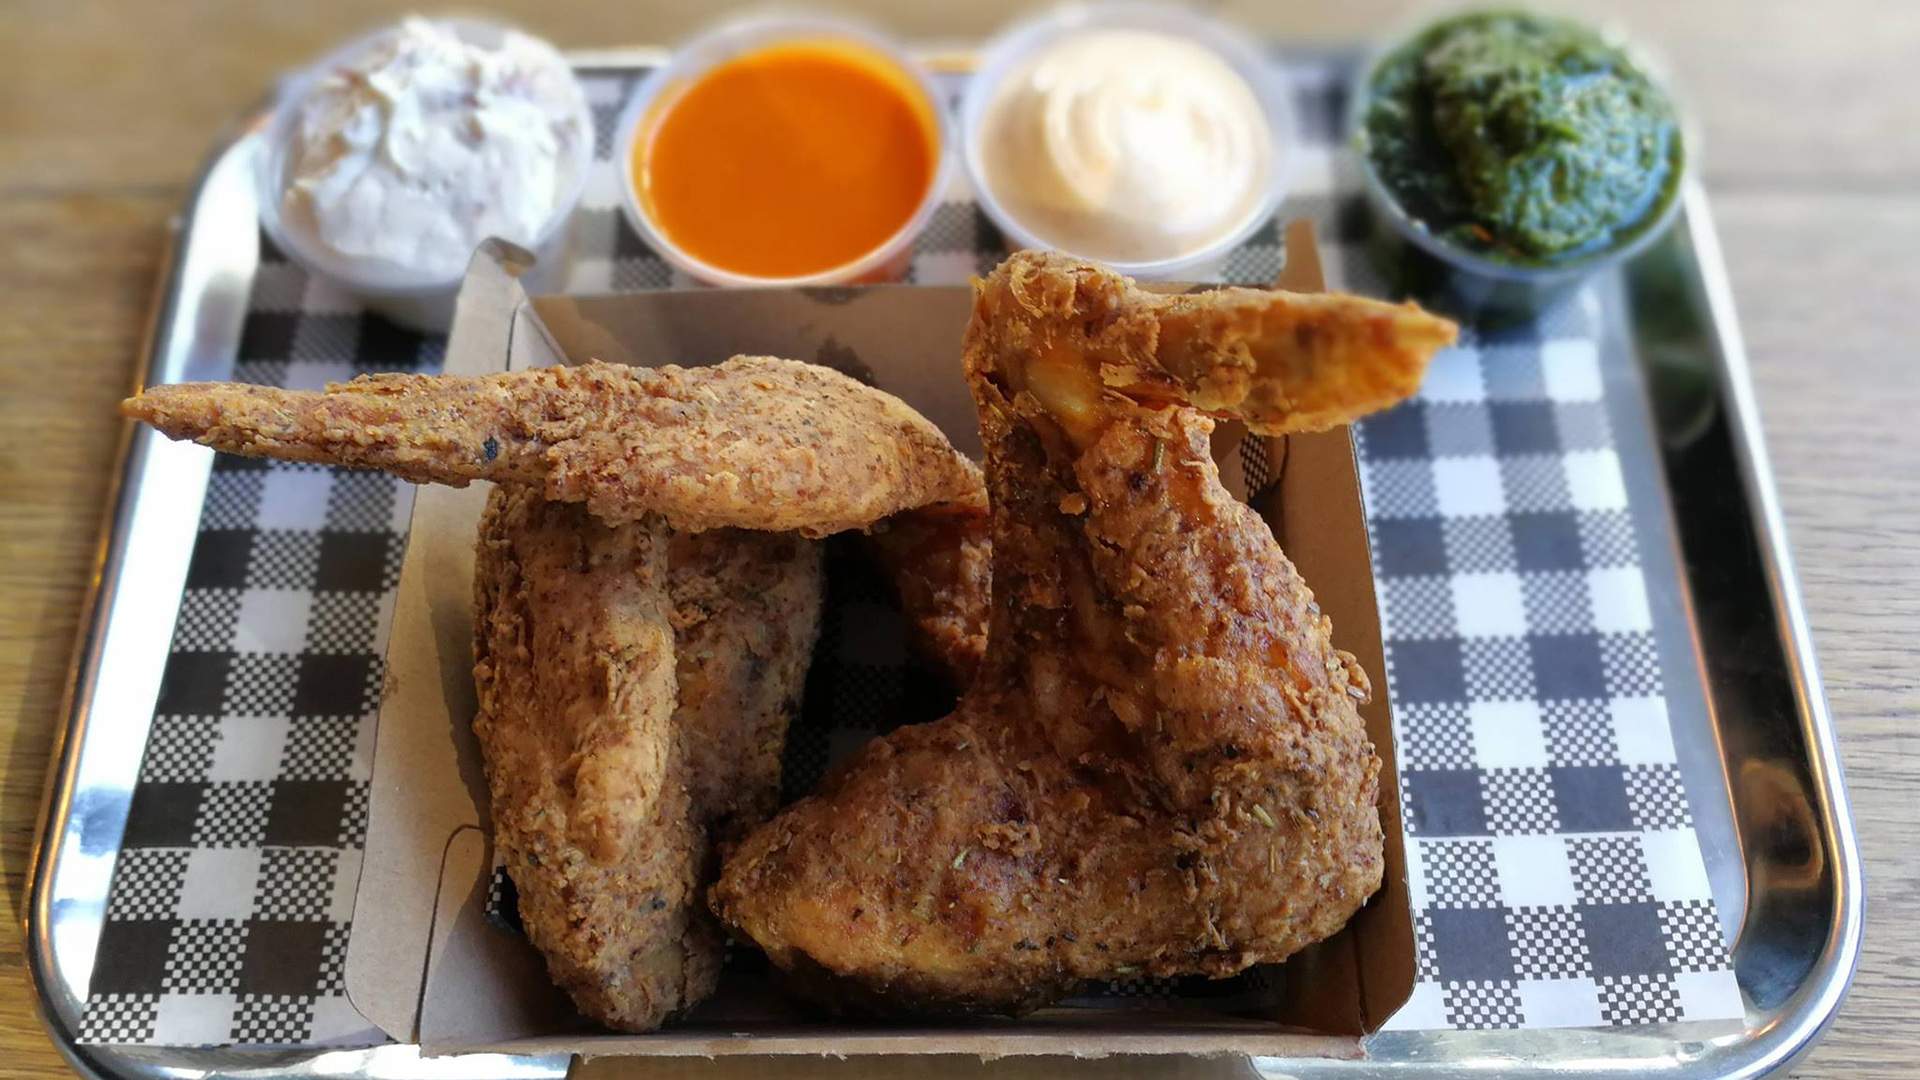 Brisbane Is Getting Yet Another Fried Chicken Joint, Flippin' the Bird